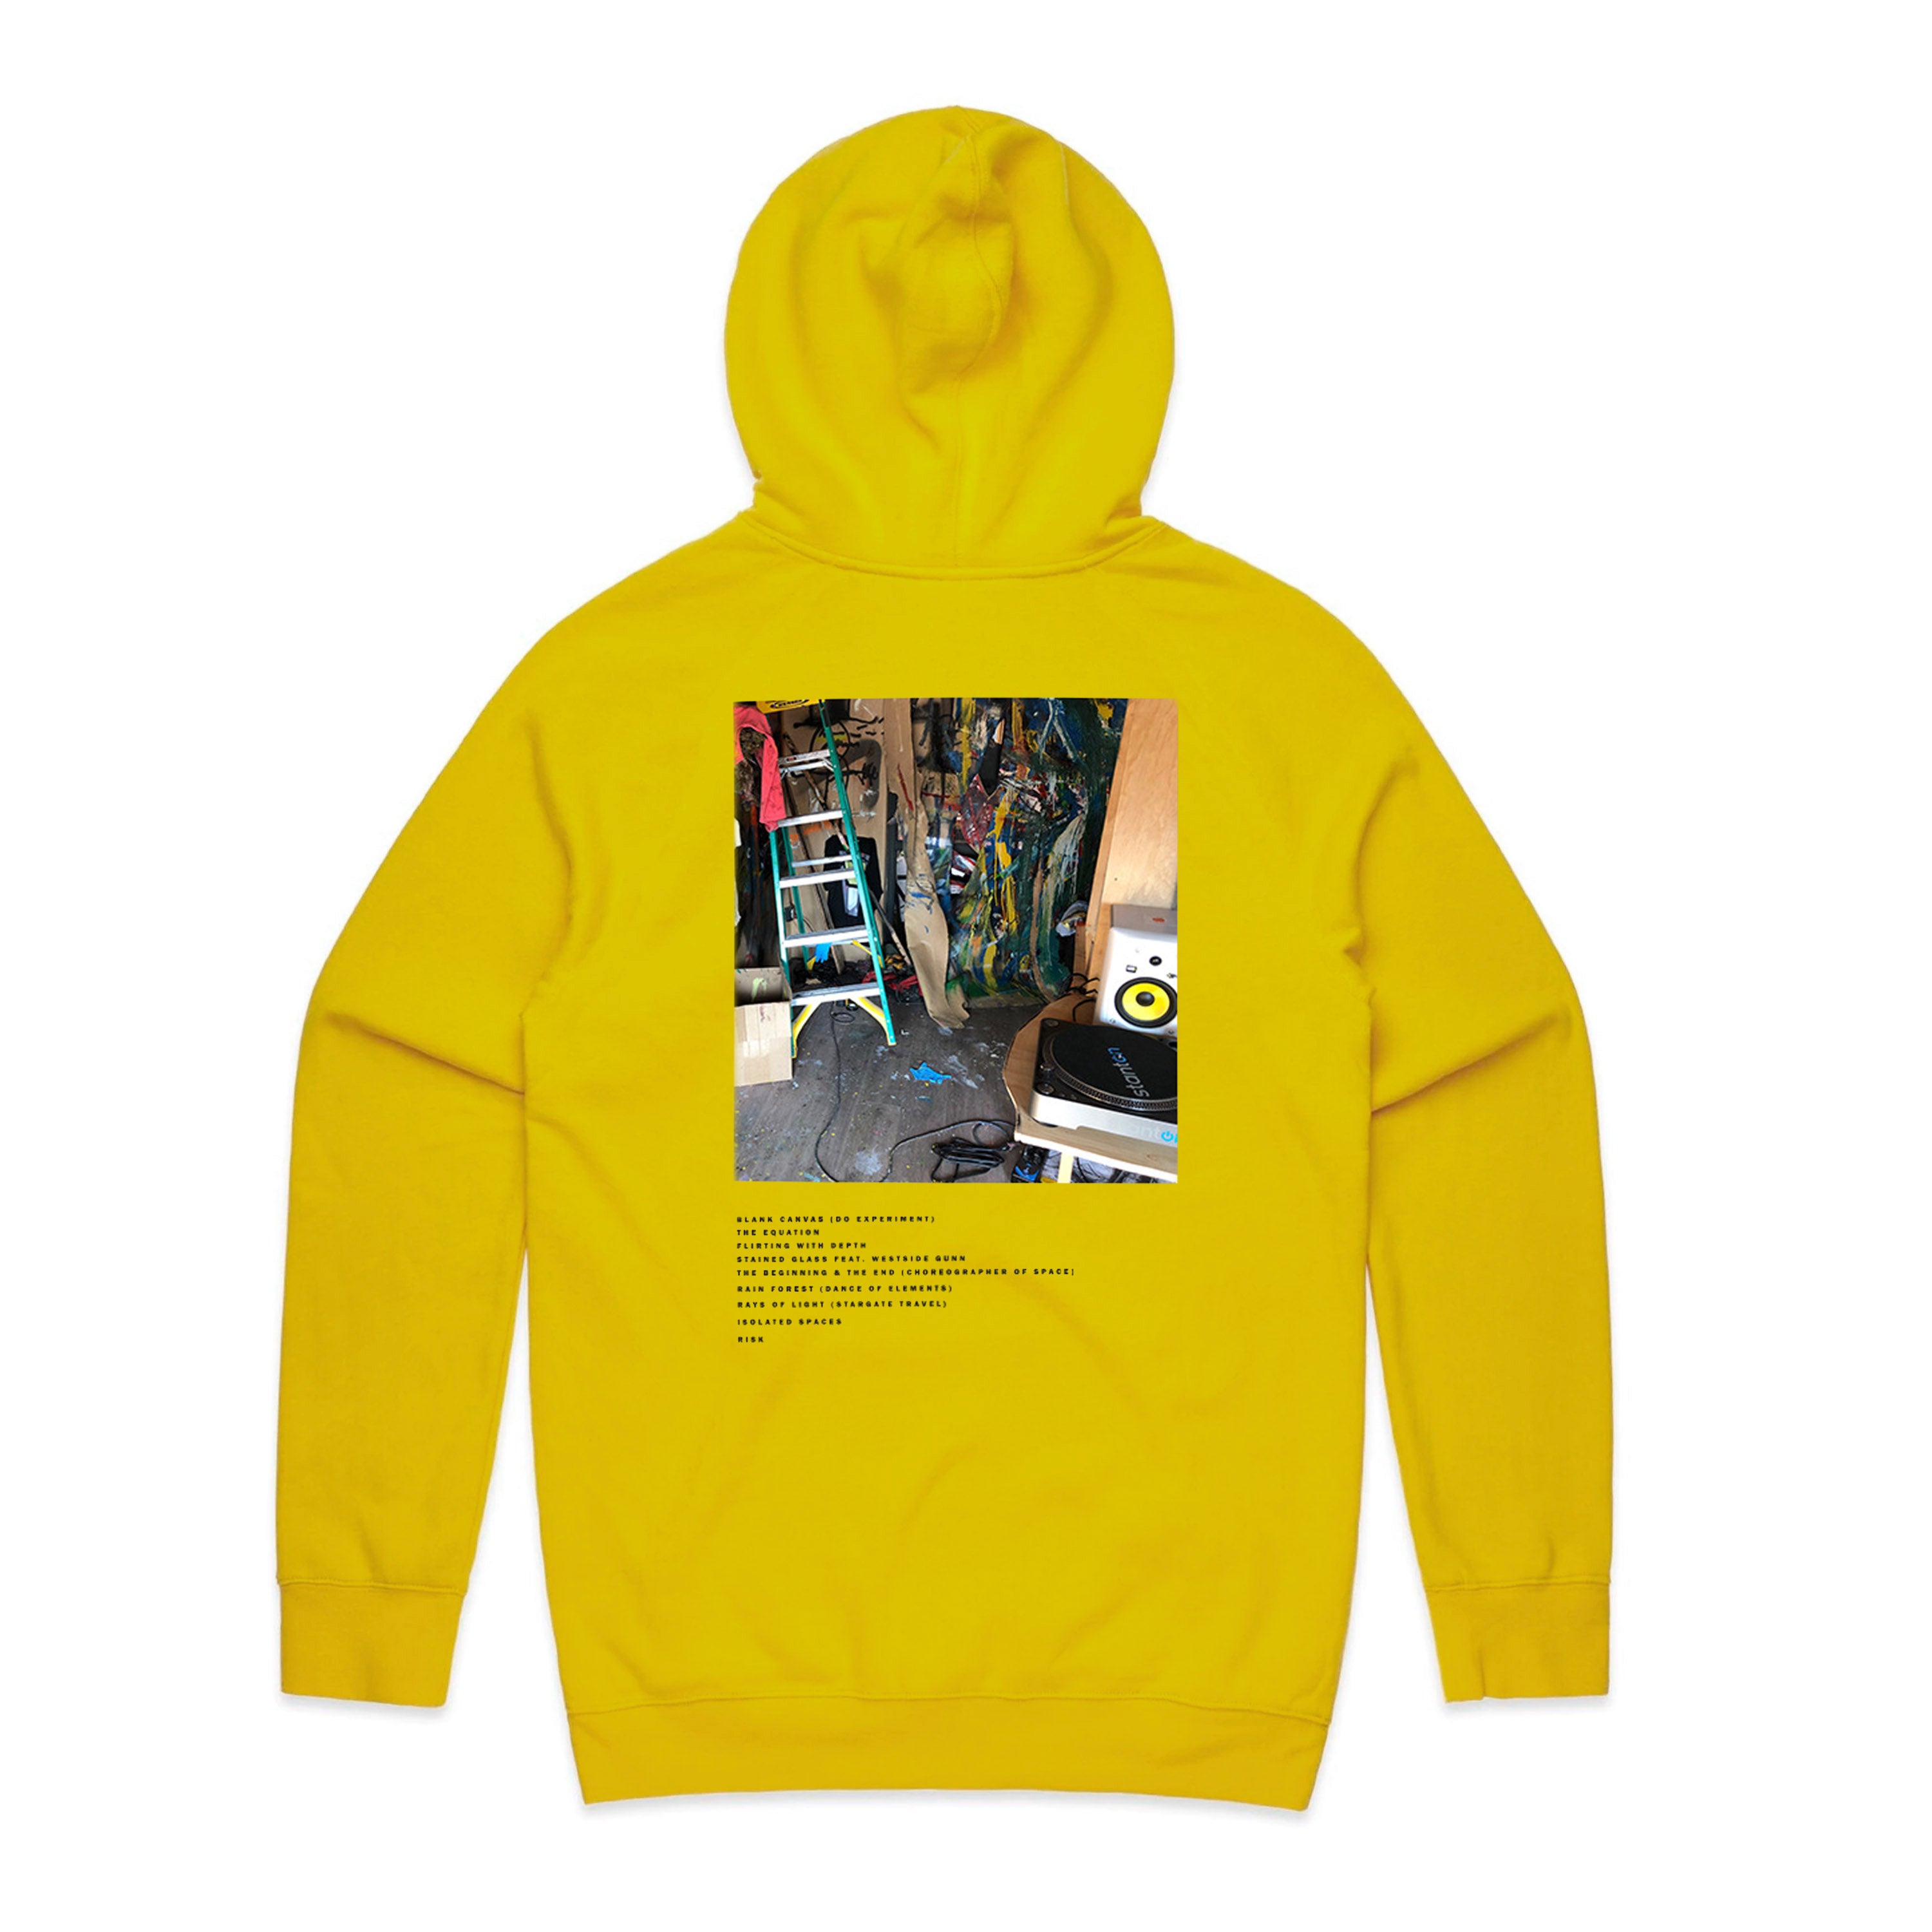 A Doctor, A Painter And An Alchemist Walk Into A Bar (Yellow Hoodie)